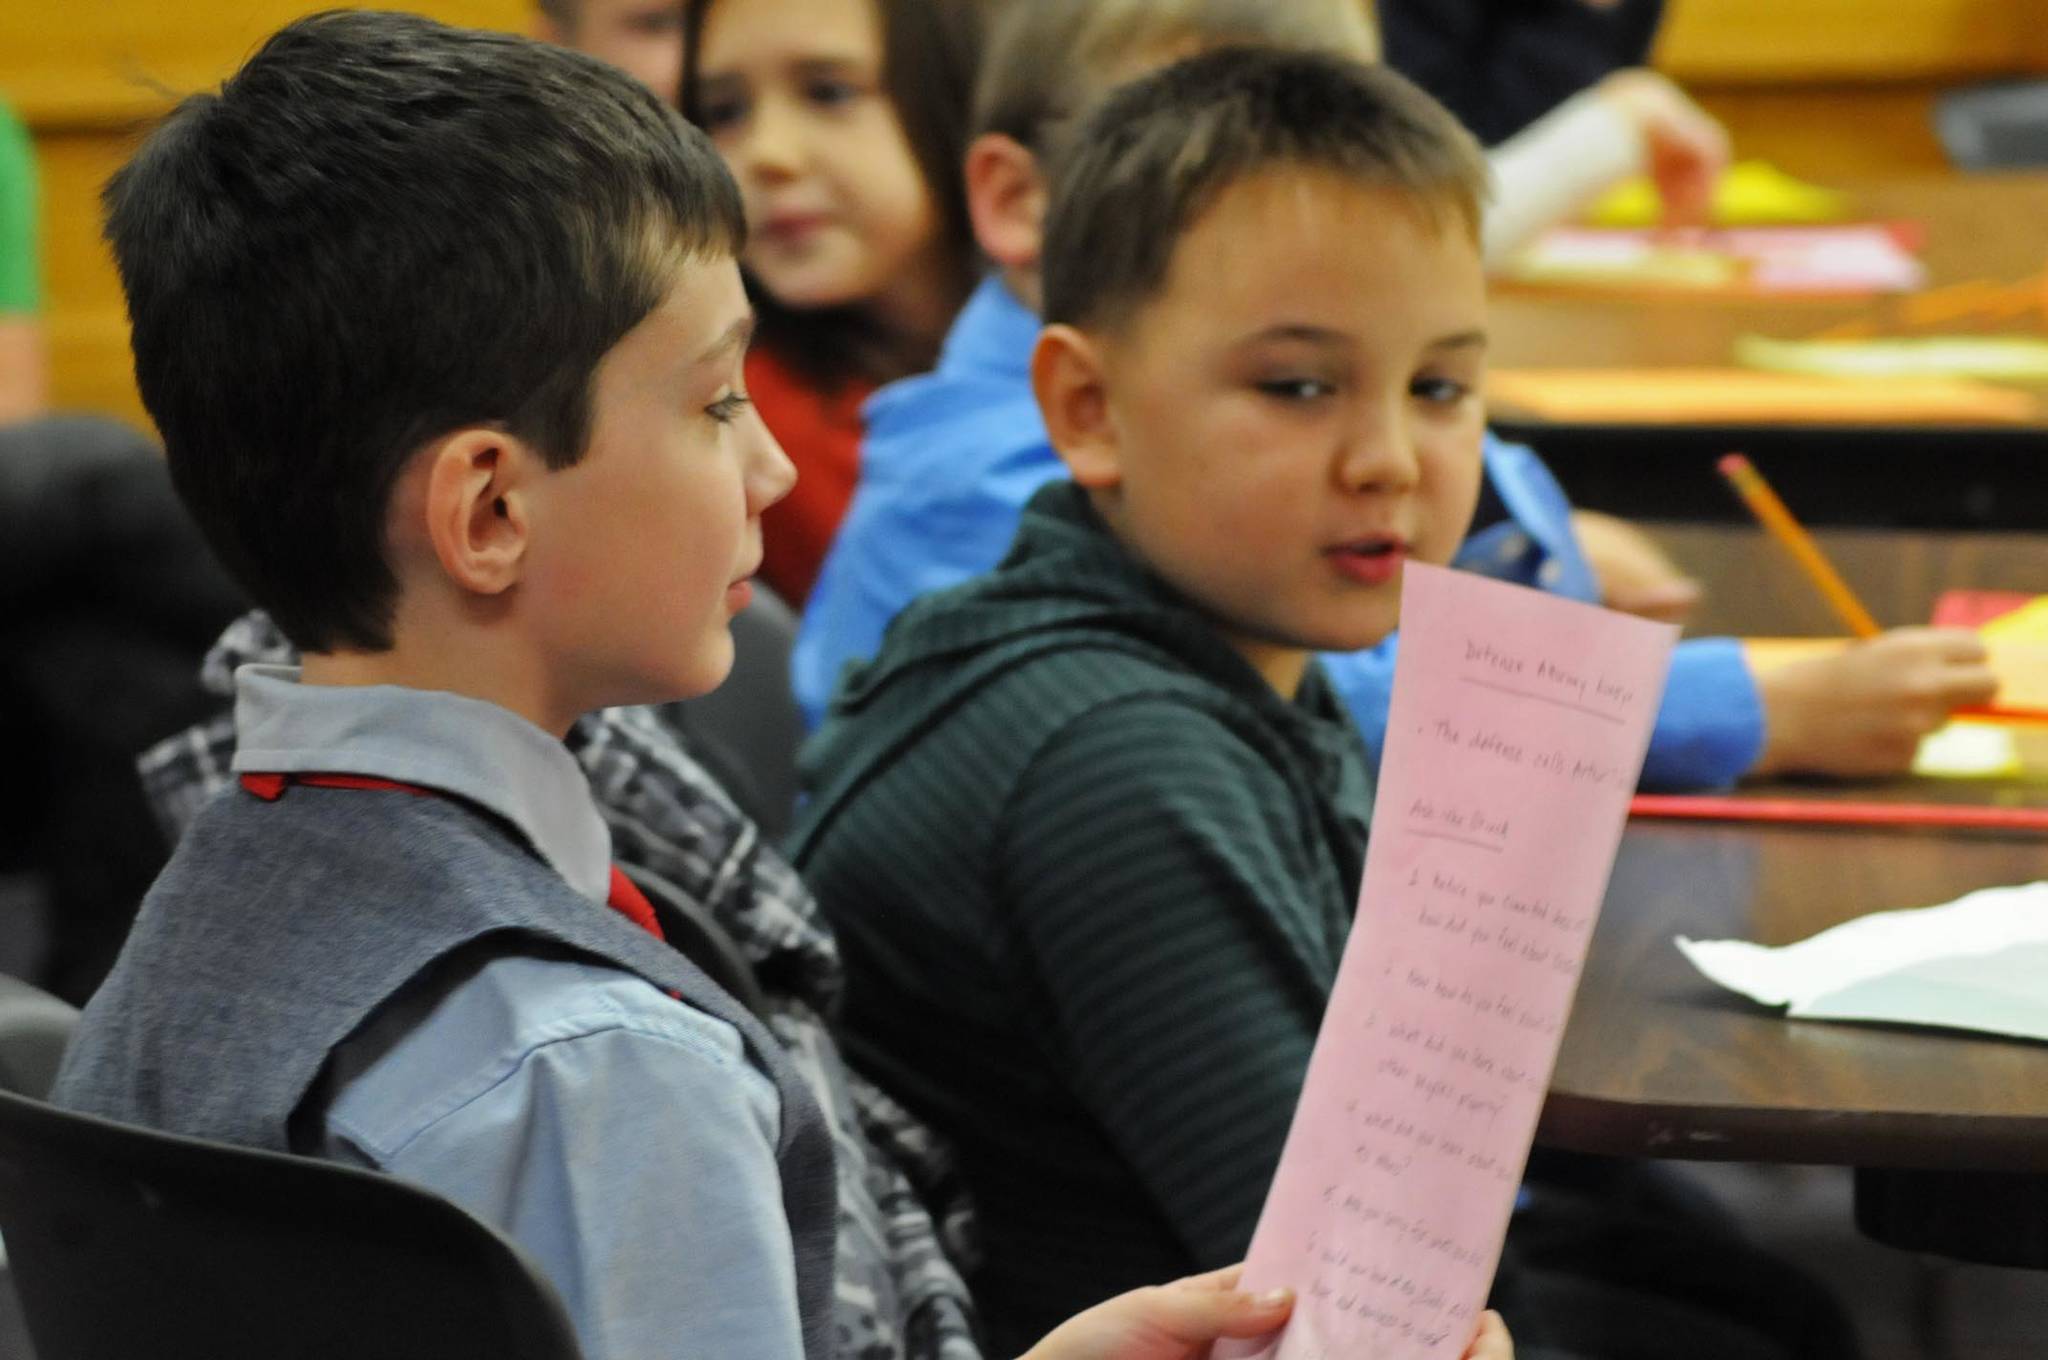 Koebrien Lazenby, a second-grader at Kalifornsky Beach Elementary School, reads from his list of questions for a witness during the class’s mock trial of “Arthur T. Grinch” based on the Dr. Seuss classic “How the Grinch Stole Christmas” on Thursday, Nov. 9, 2017 in Kenai, Alaska. The class has been studying civics and learning about the court process and put on a mock sentencing hearing, complete with witnesses and a jury composed of students’ parents and K-Beach Elementary Principal Nate Crabtree. (Photo by Elizabeth Earl/Peninsula Clarion)